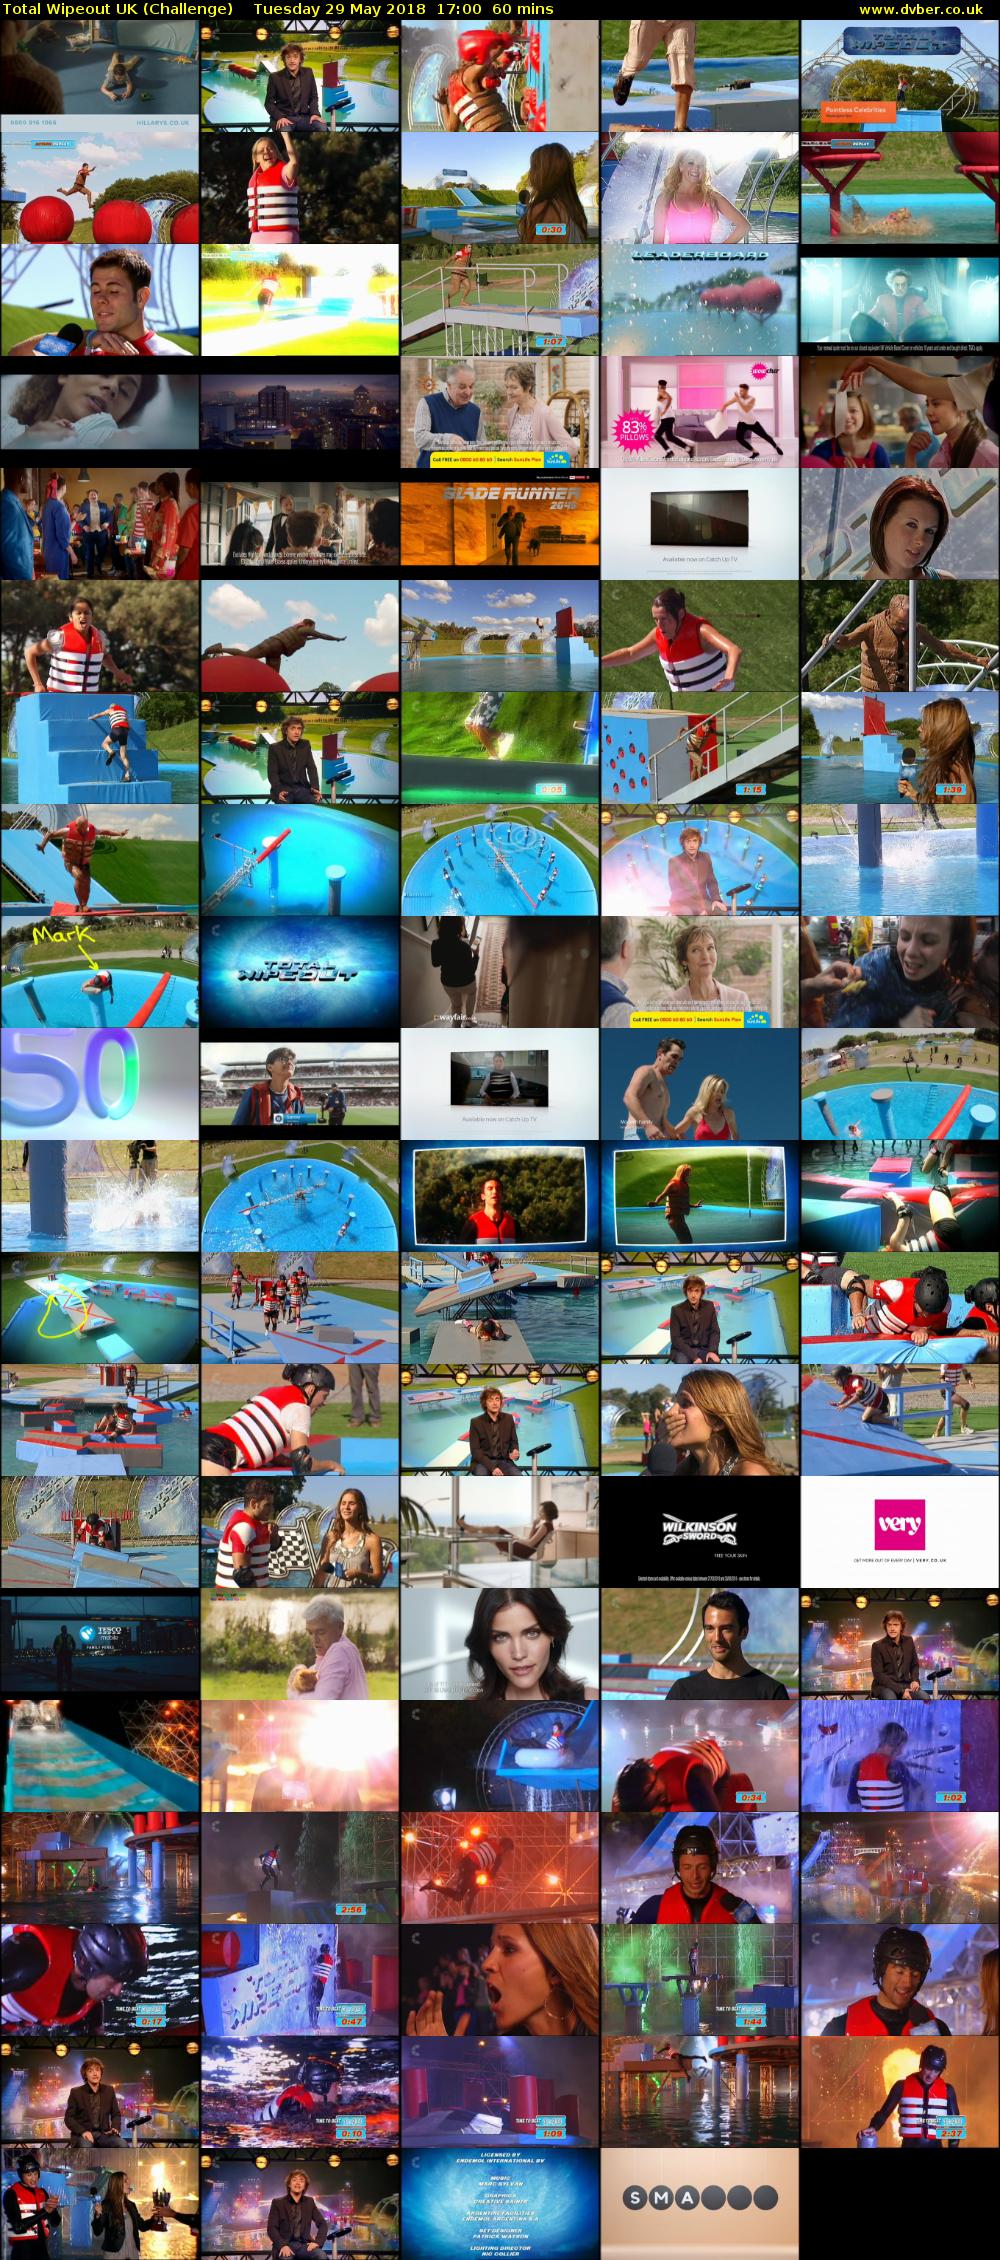 Total Wipeout UK (Challenge) Tuesday 29 May 2018 17:00 - 18:00